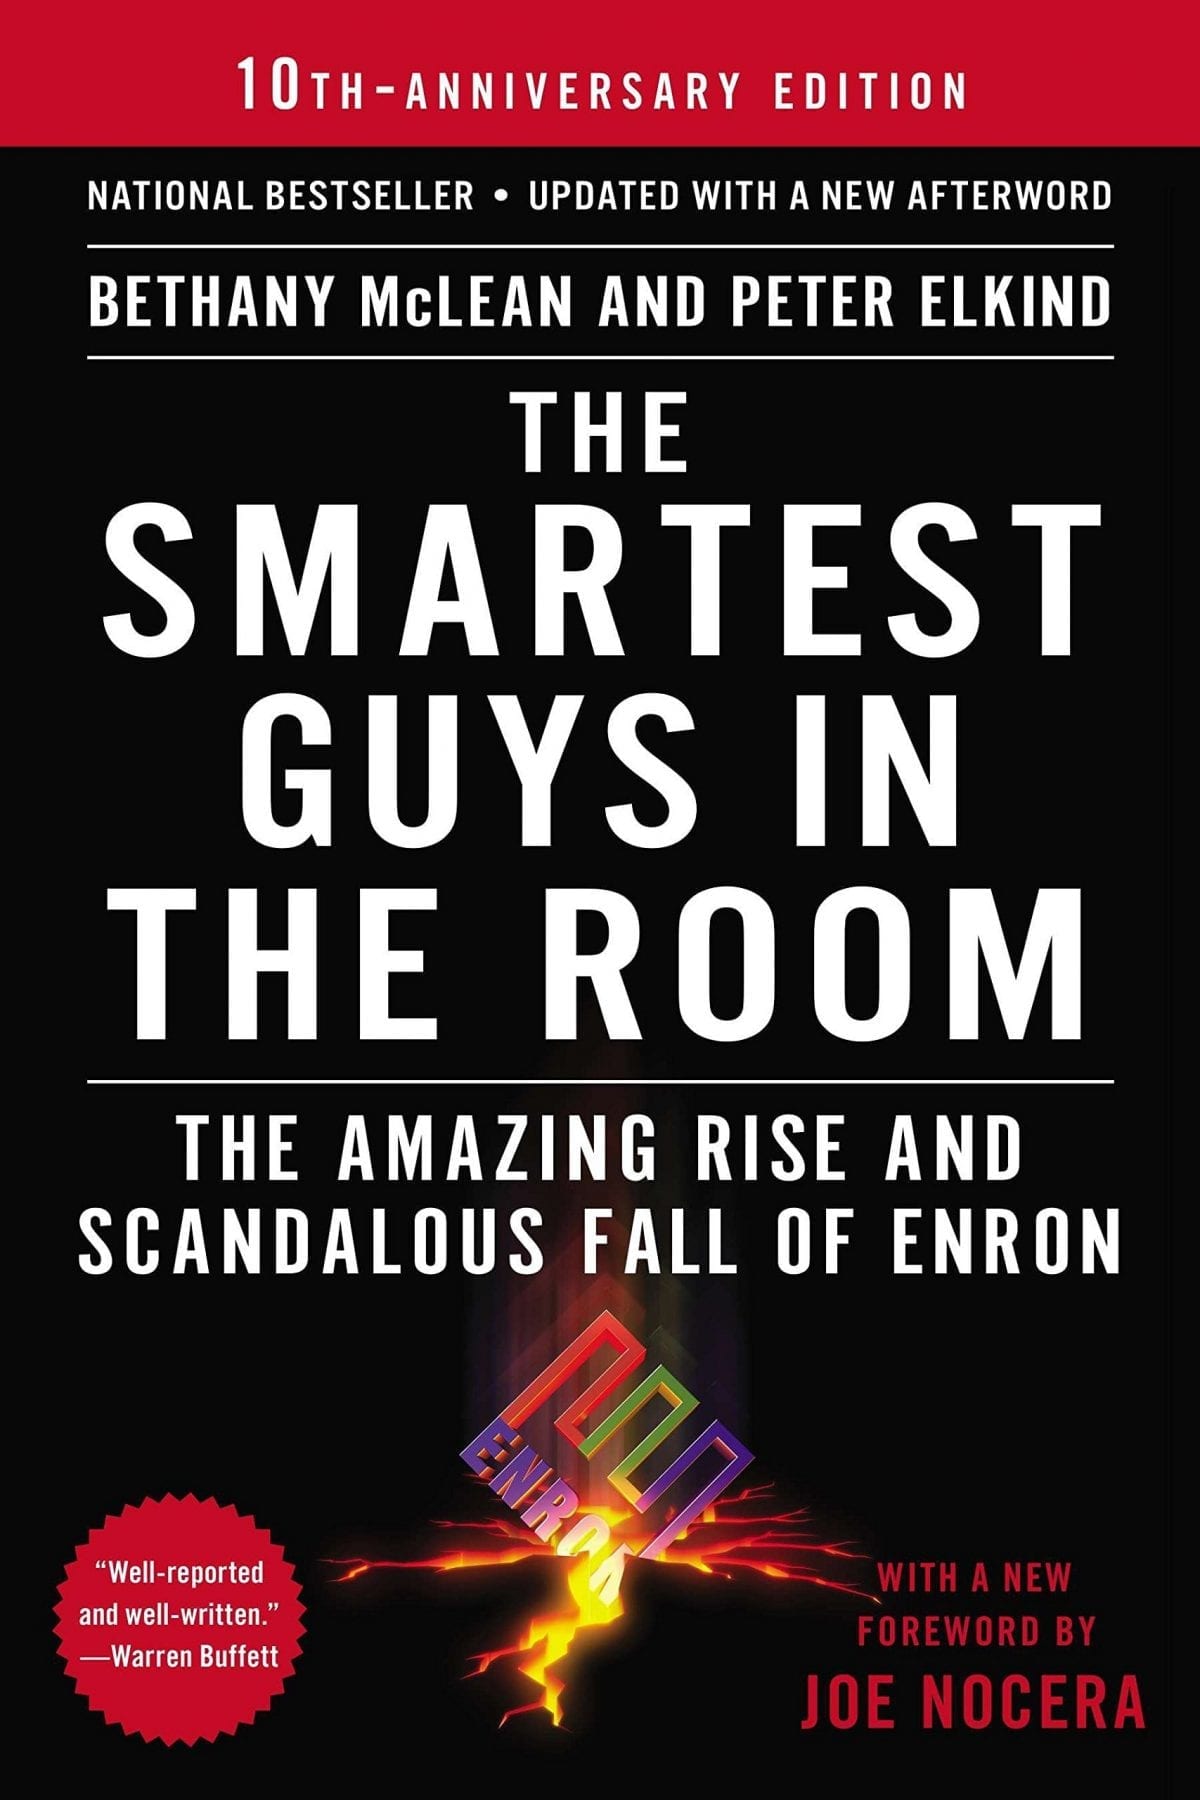 The Smartest Guys in the Room: The Amazing Rise and Scandalous Fall of Enron by Bethany McLean and Peter Elkind